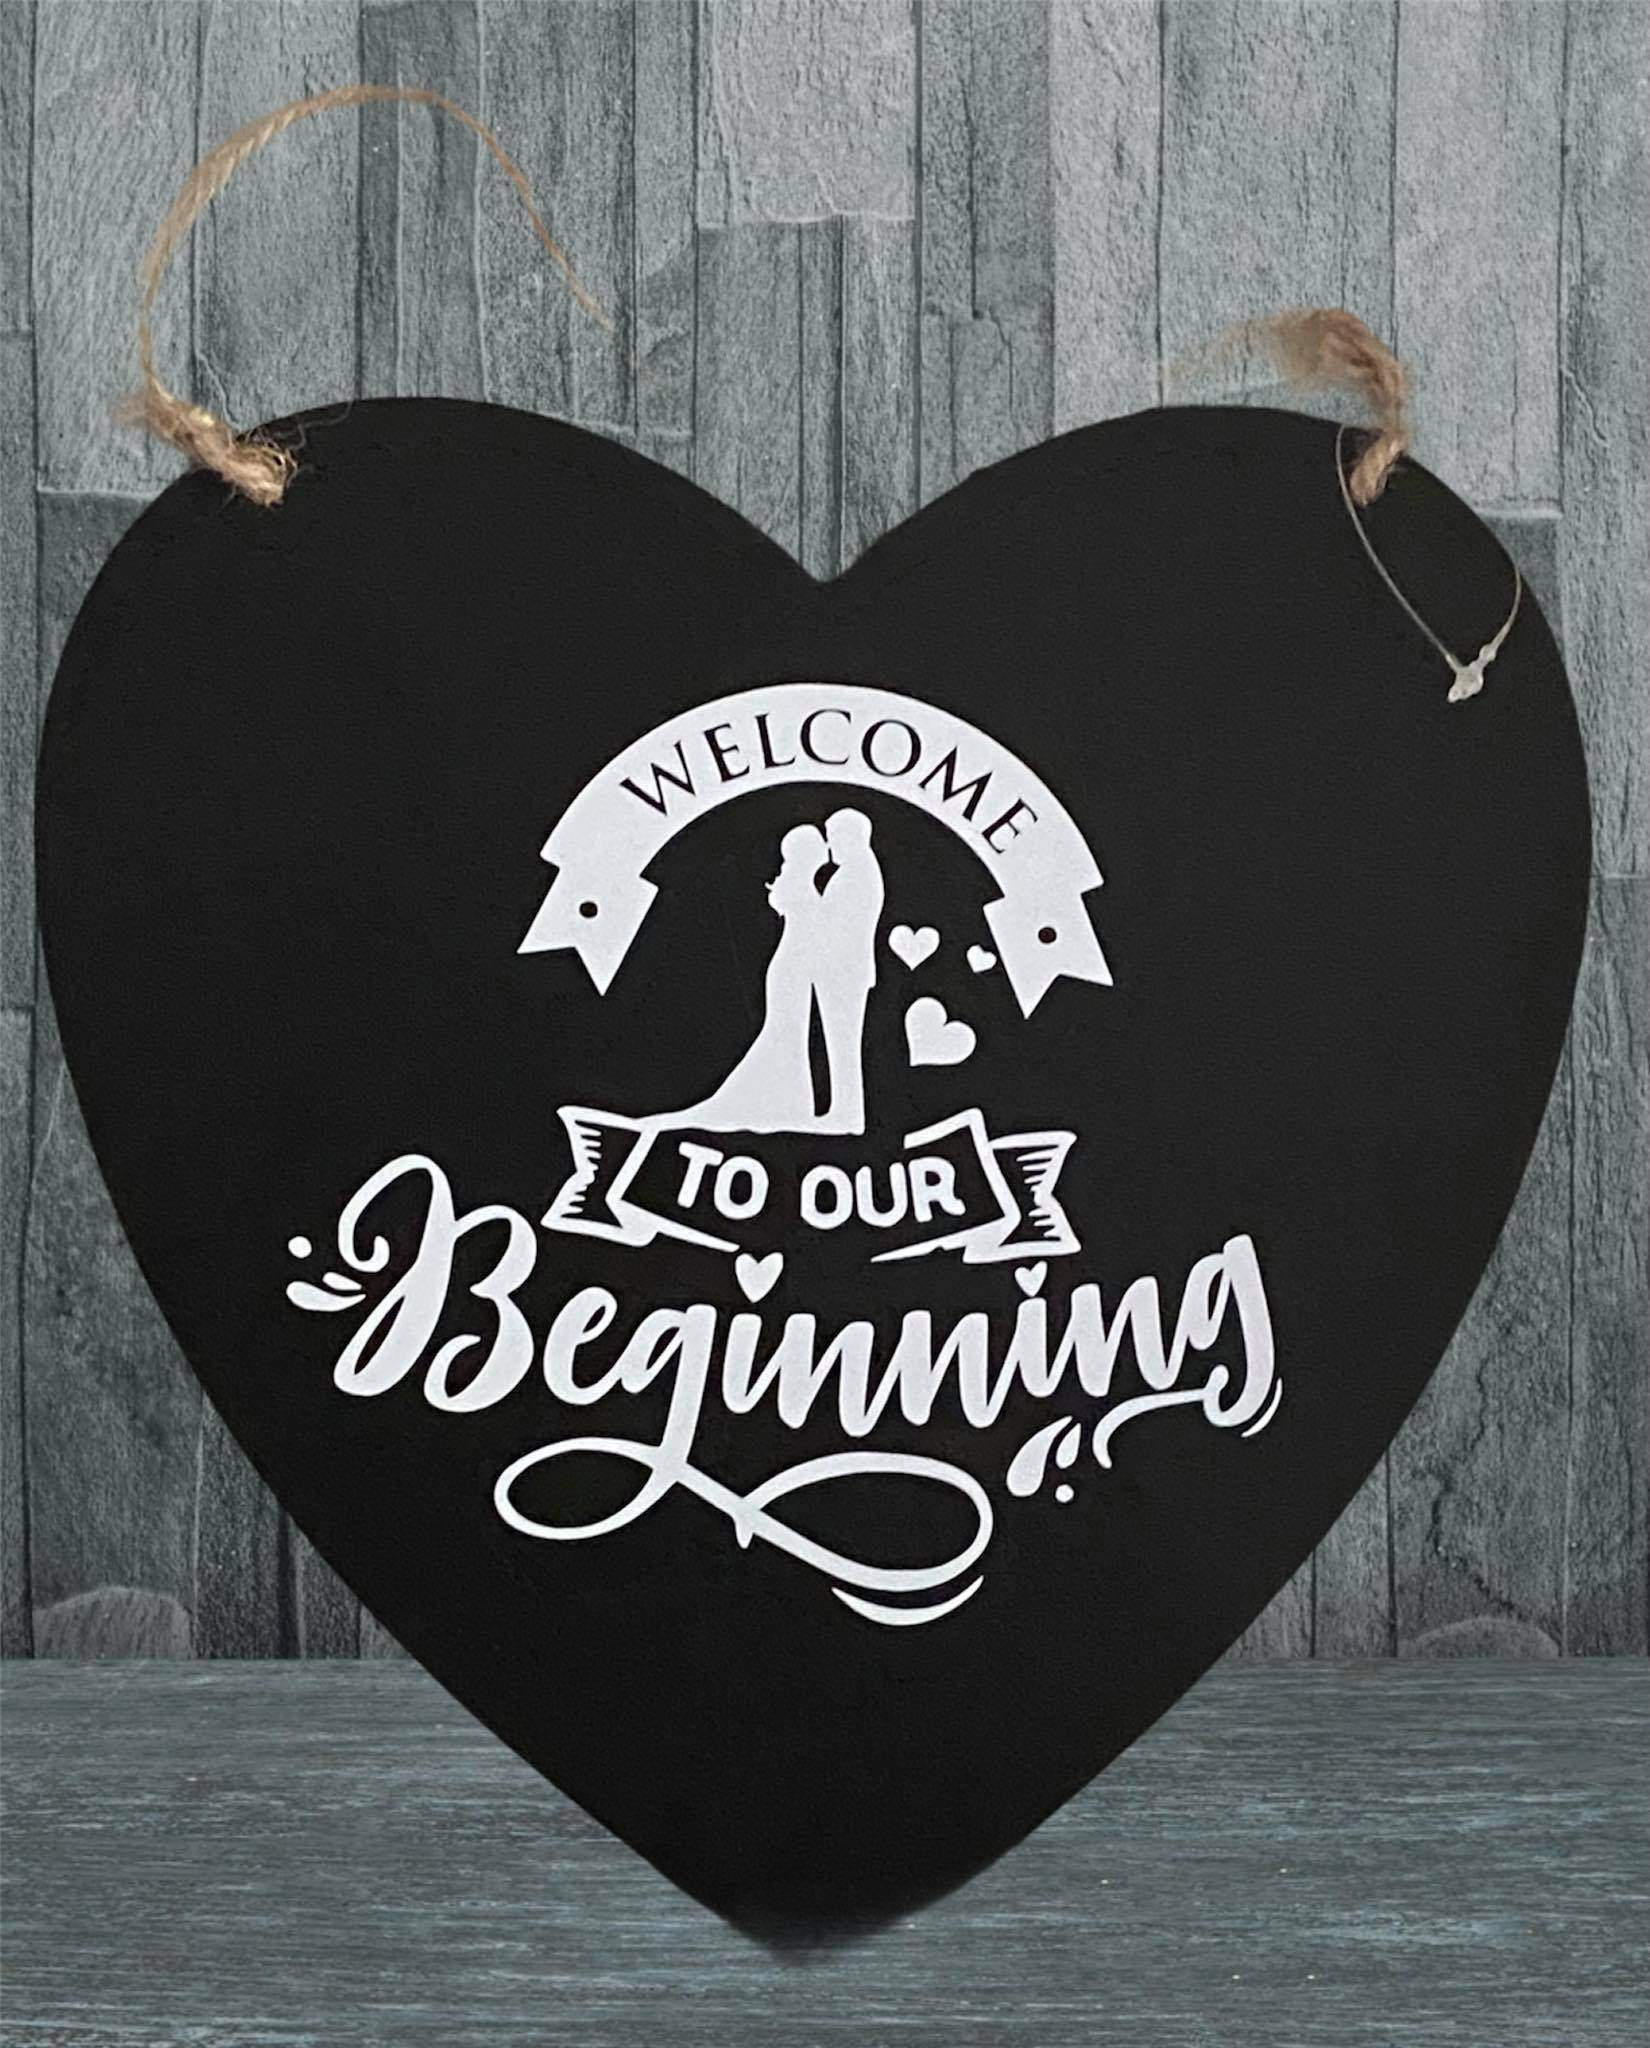 "Welcome to our Beginning" Hanging Heart